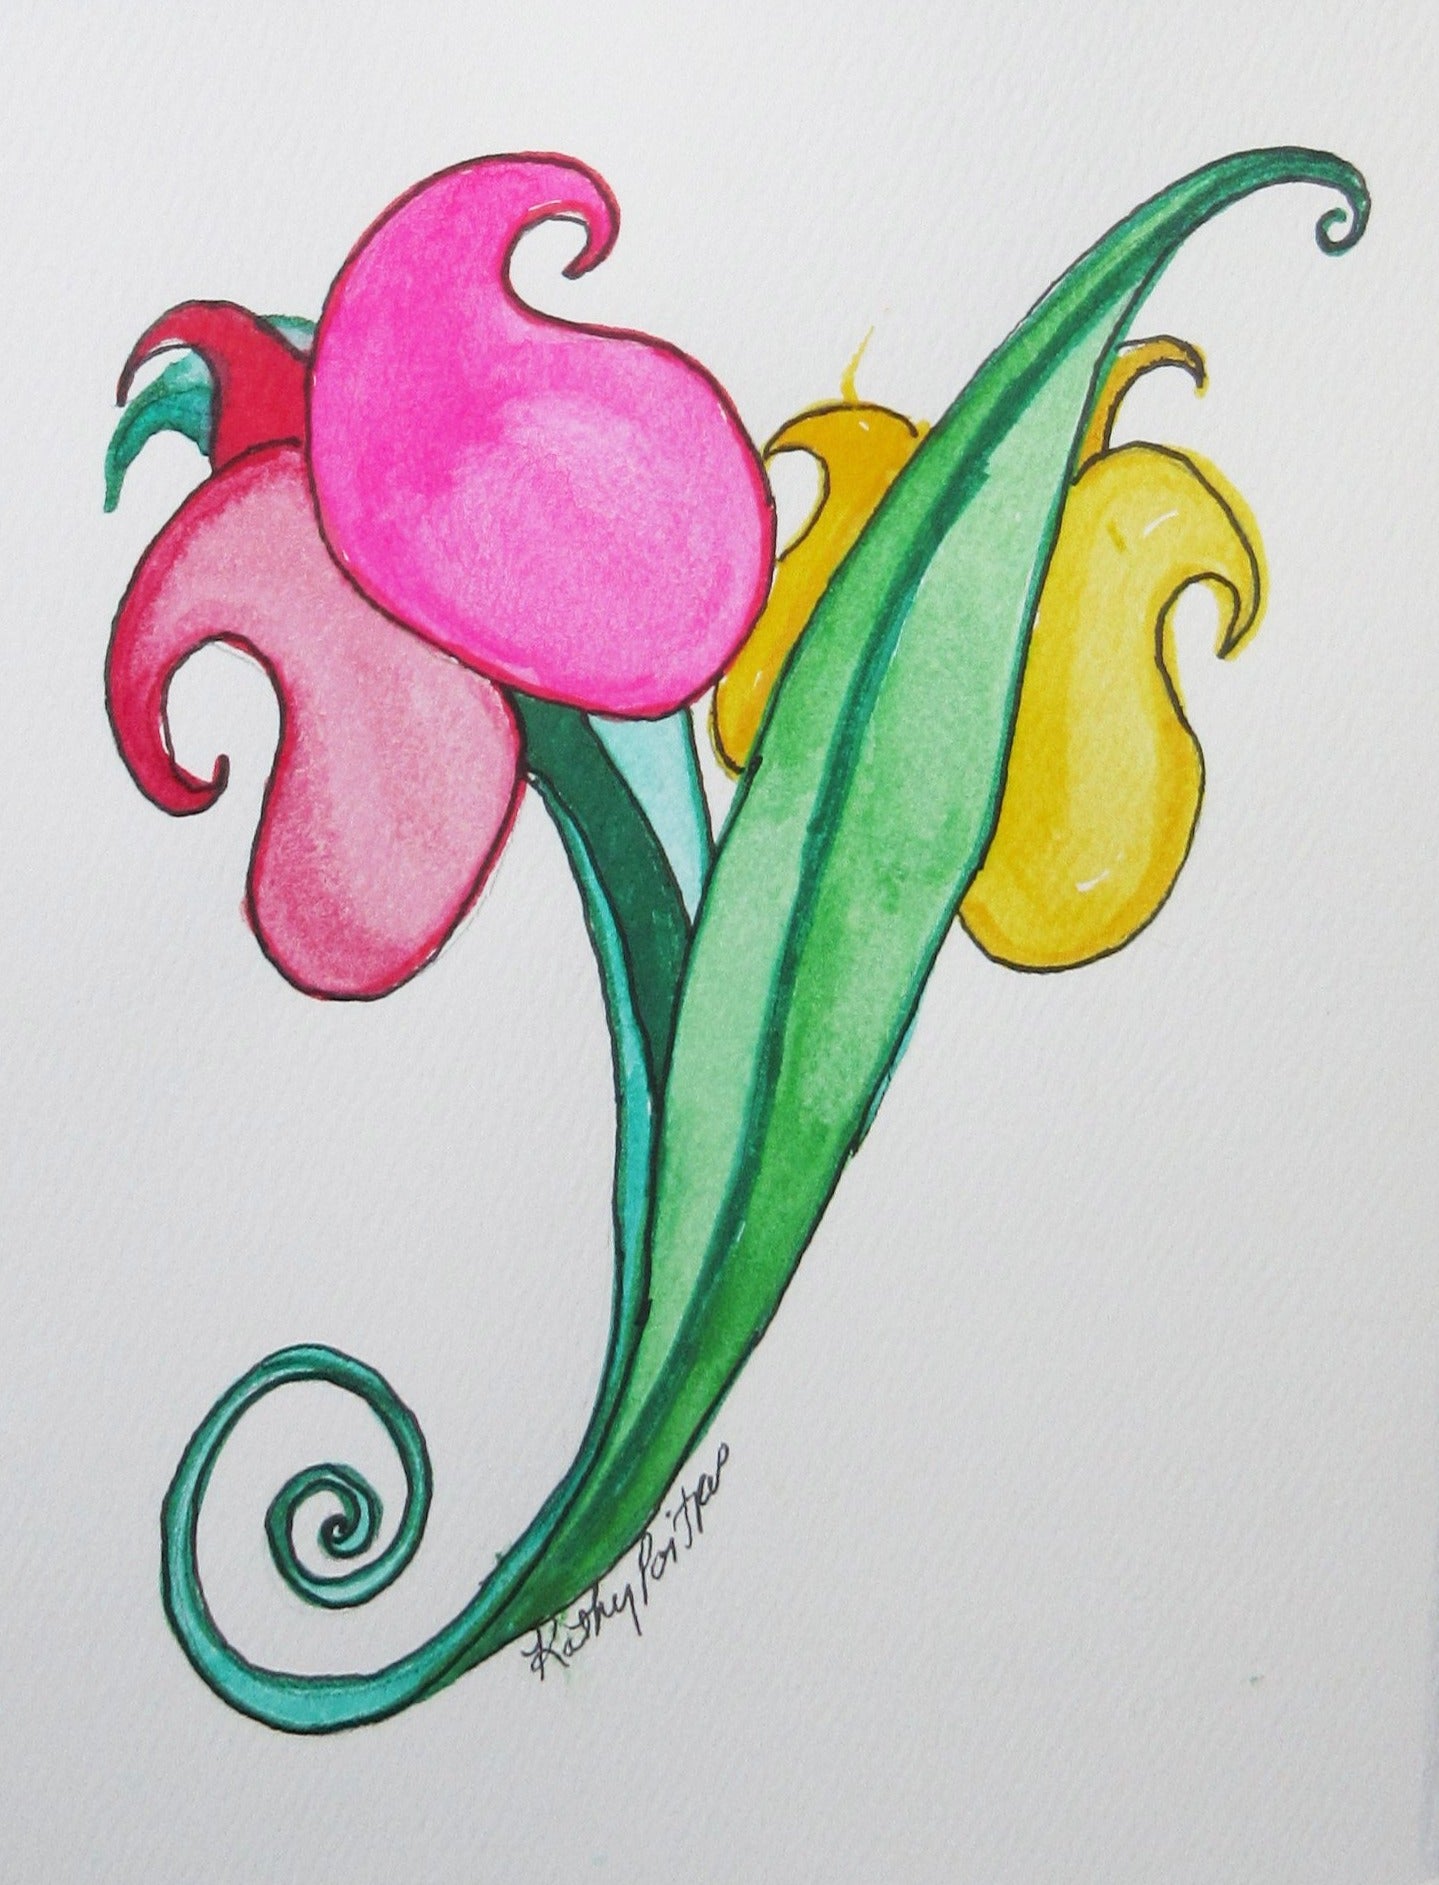 abstract watercolor and ink tulip art card with deckle edge. Two tulips. One pink, one yellow